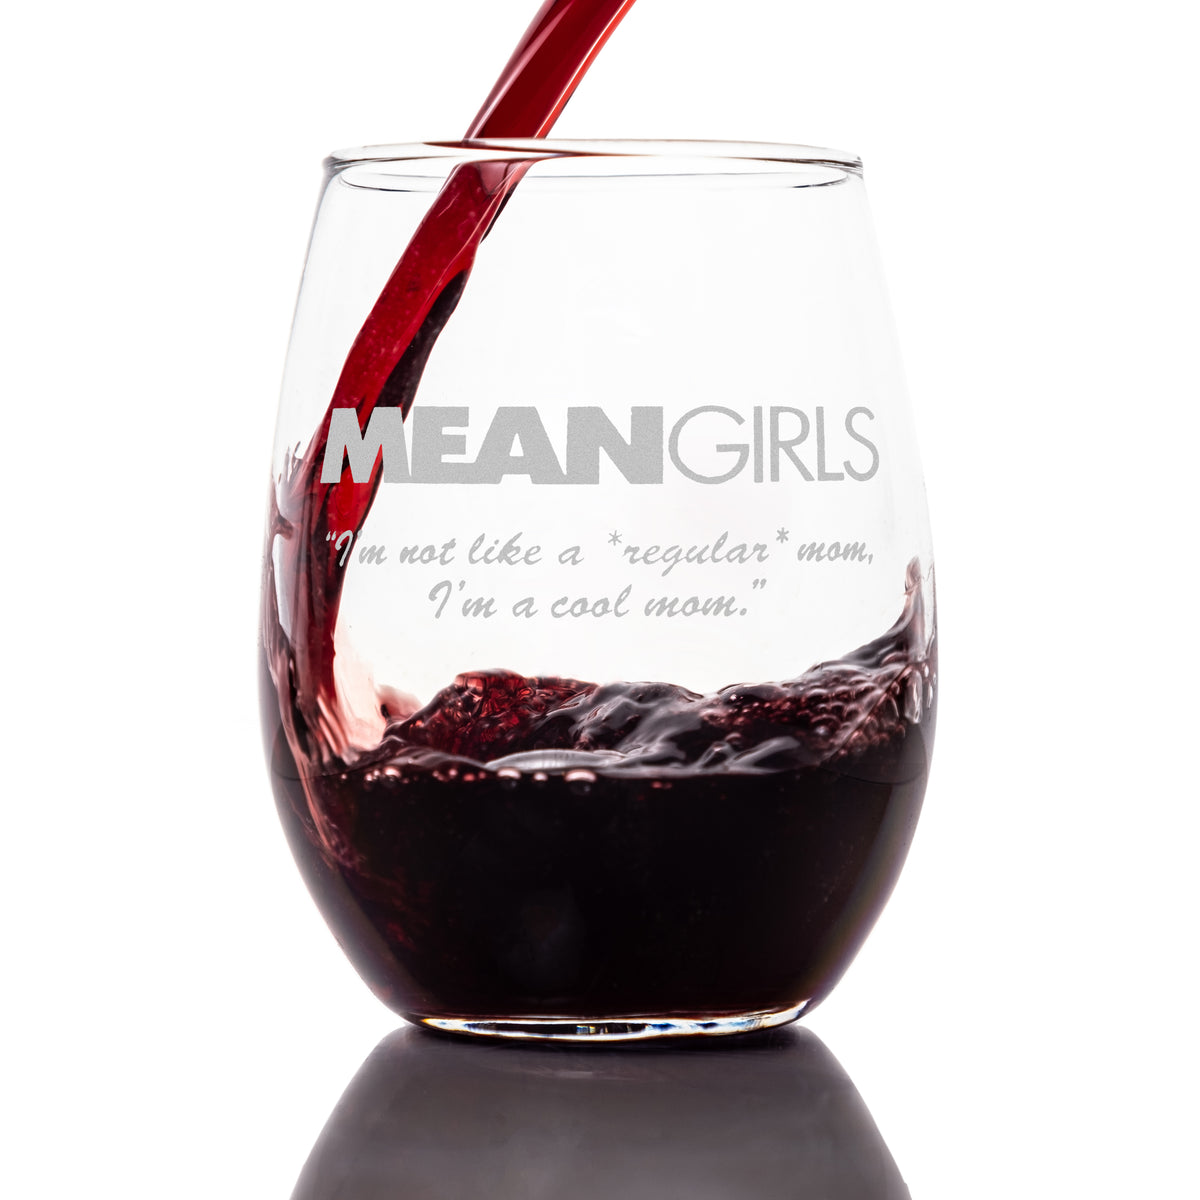 Mean Girls Stemless Refreshment Glass with Quote "I'm Not Like a Regular Mom"